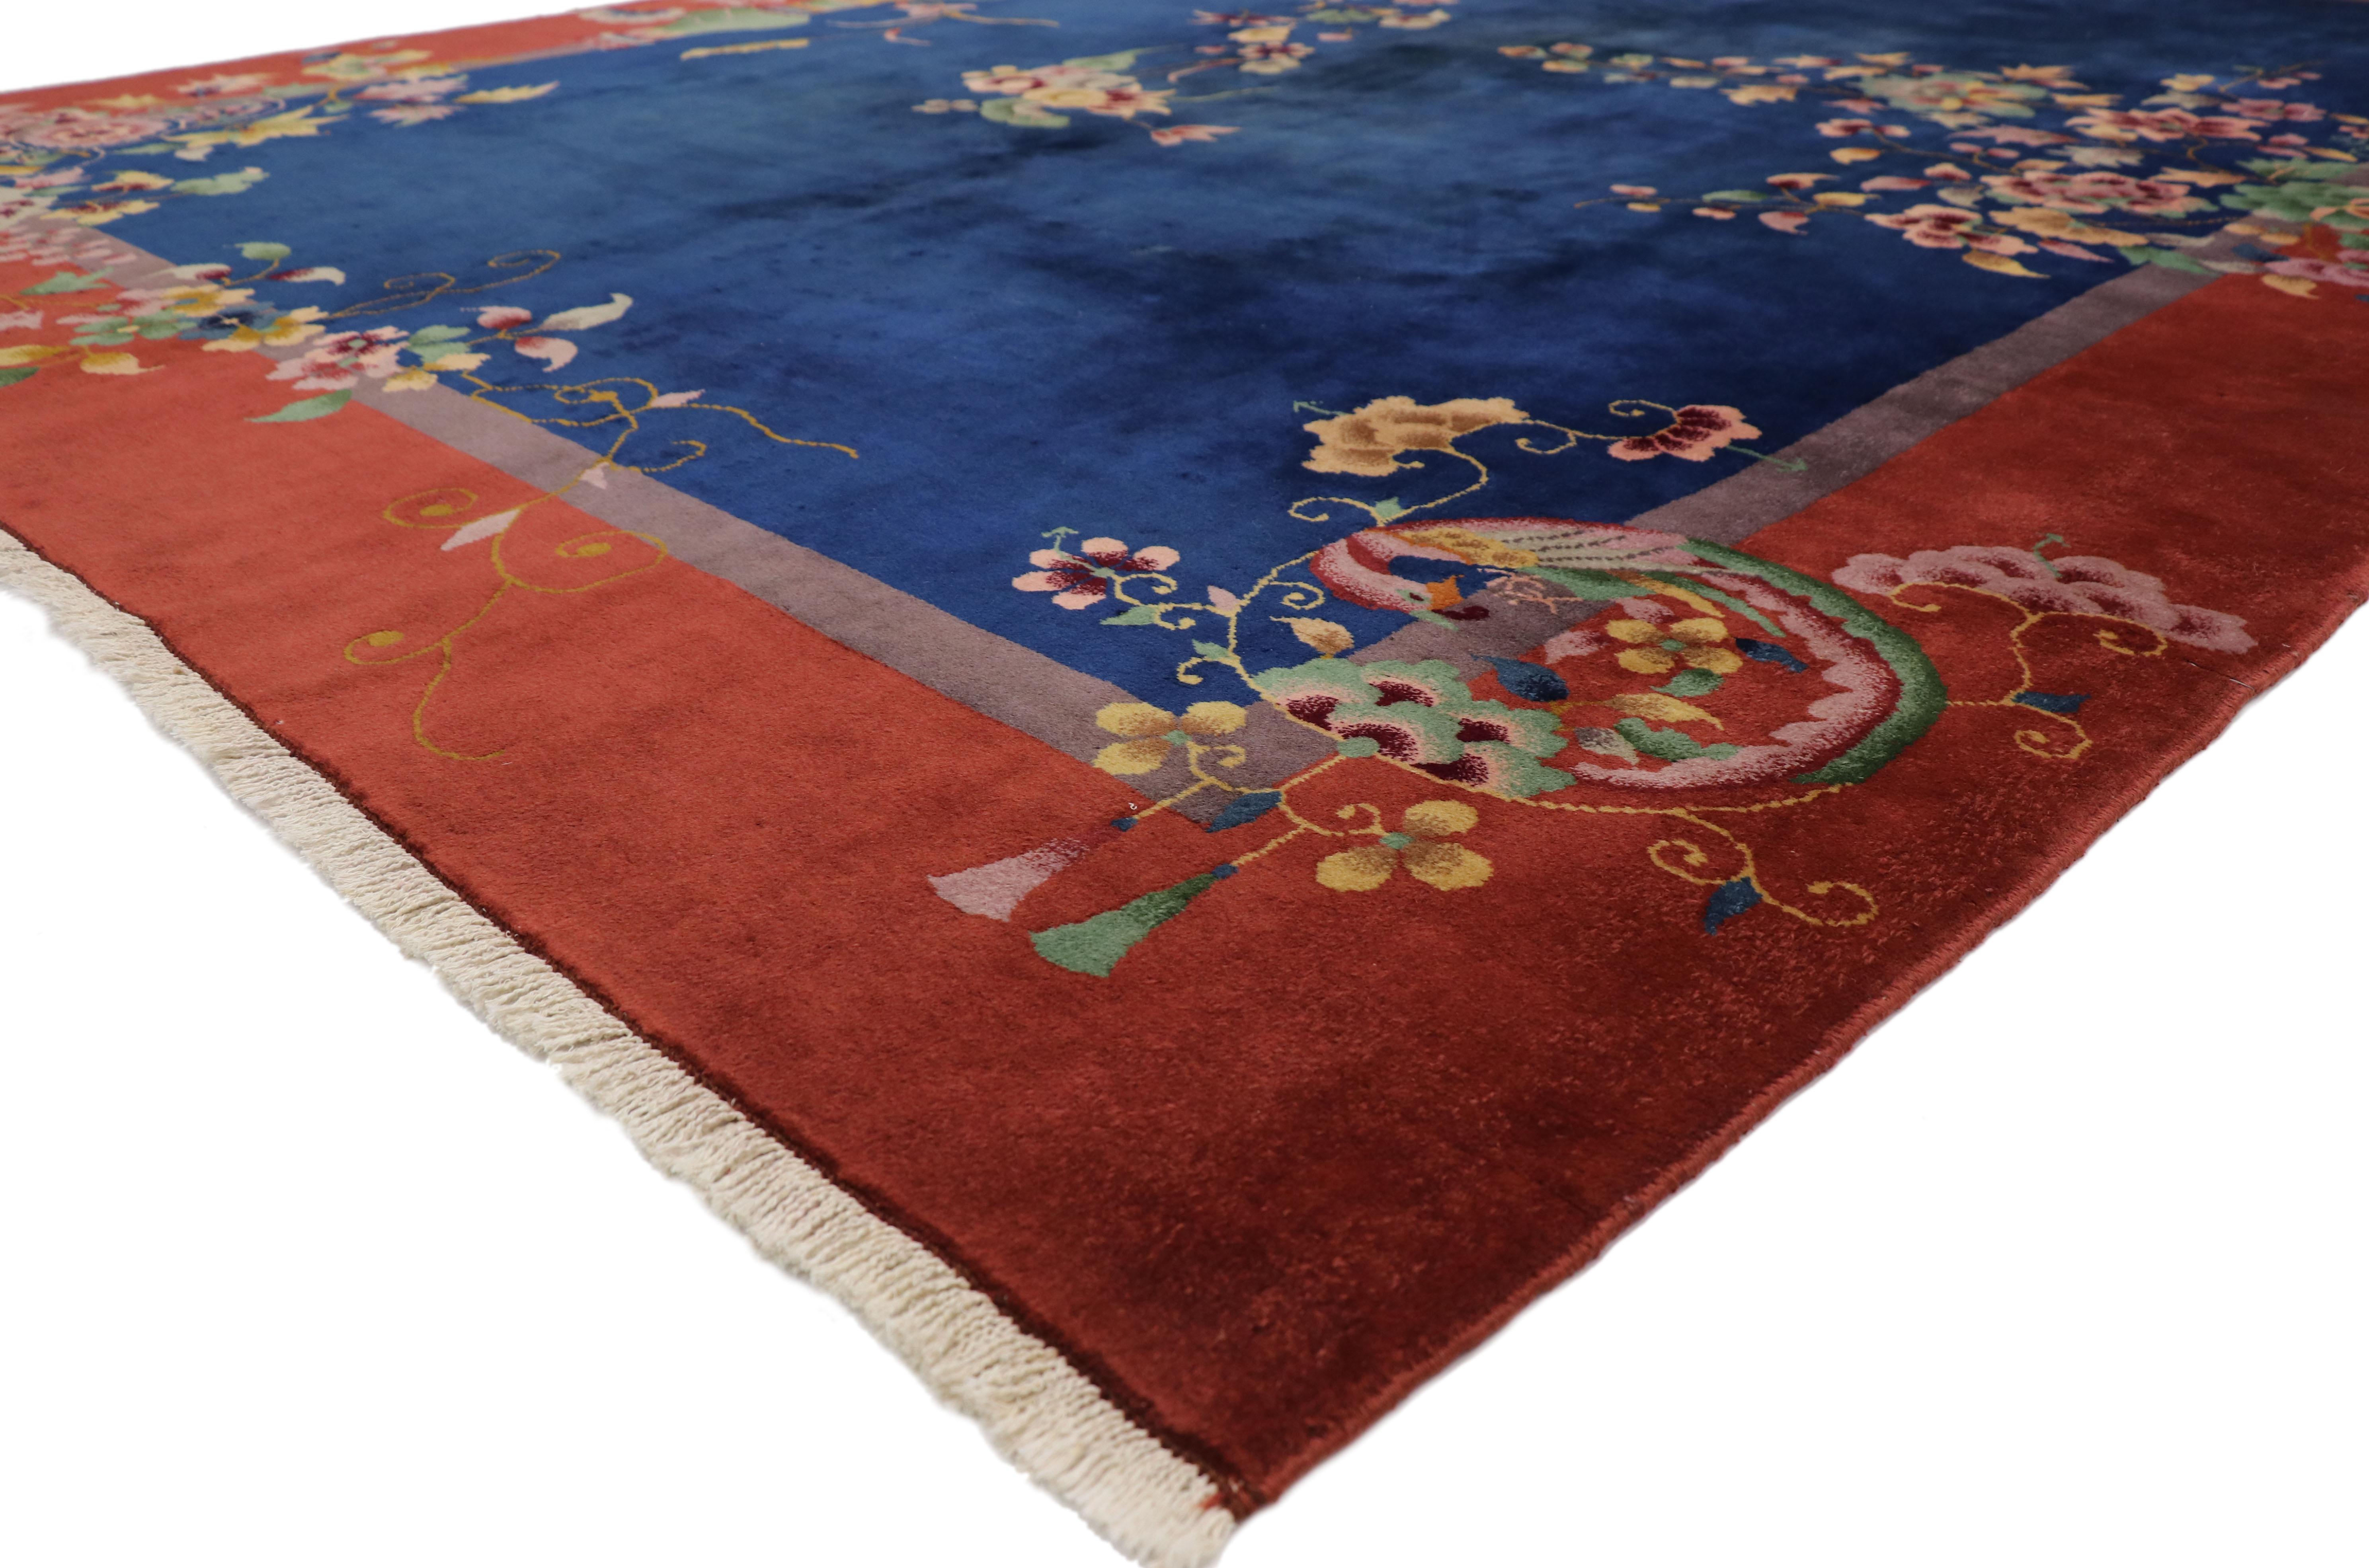 77354 Antique Chinese Art Deco Rug with Jazz Age Chinoiserie Style. This hand-knotted wool antique Chinese Art Deco rug features elegant sprays of flowers interlaced with a variety of auspicious symbols overlaid upon an abrashed navy blue field and